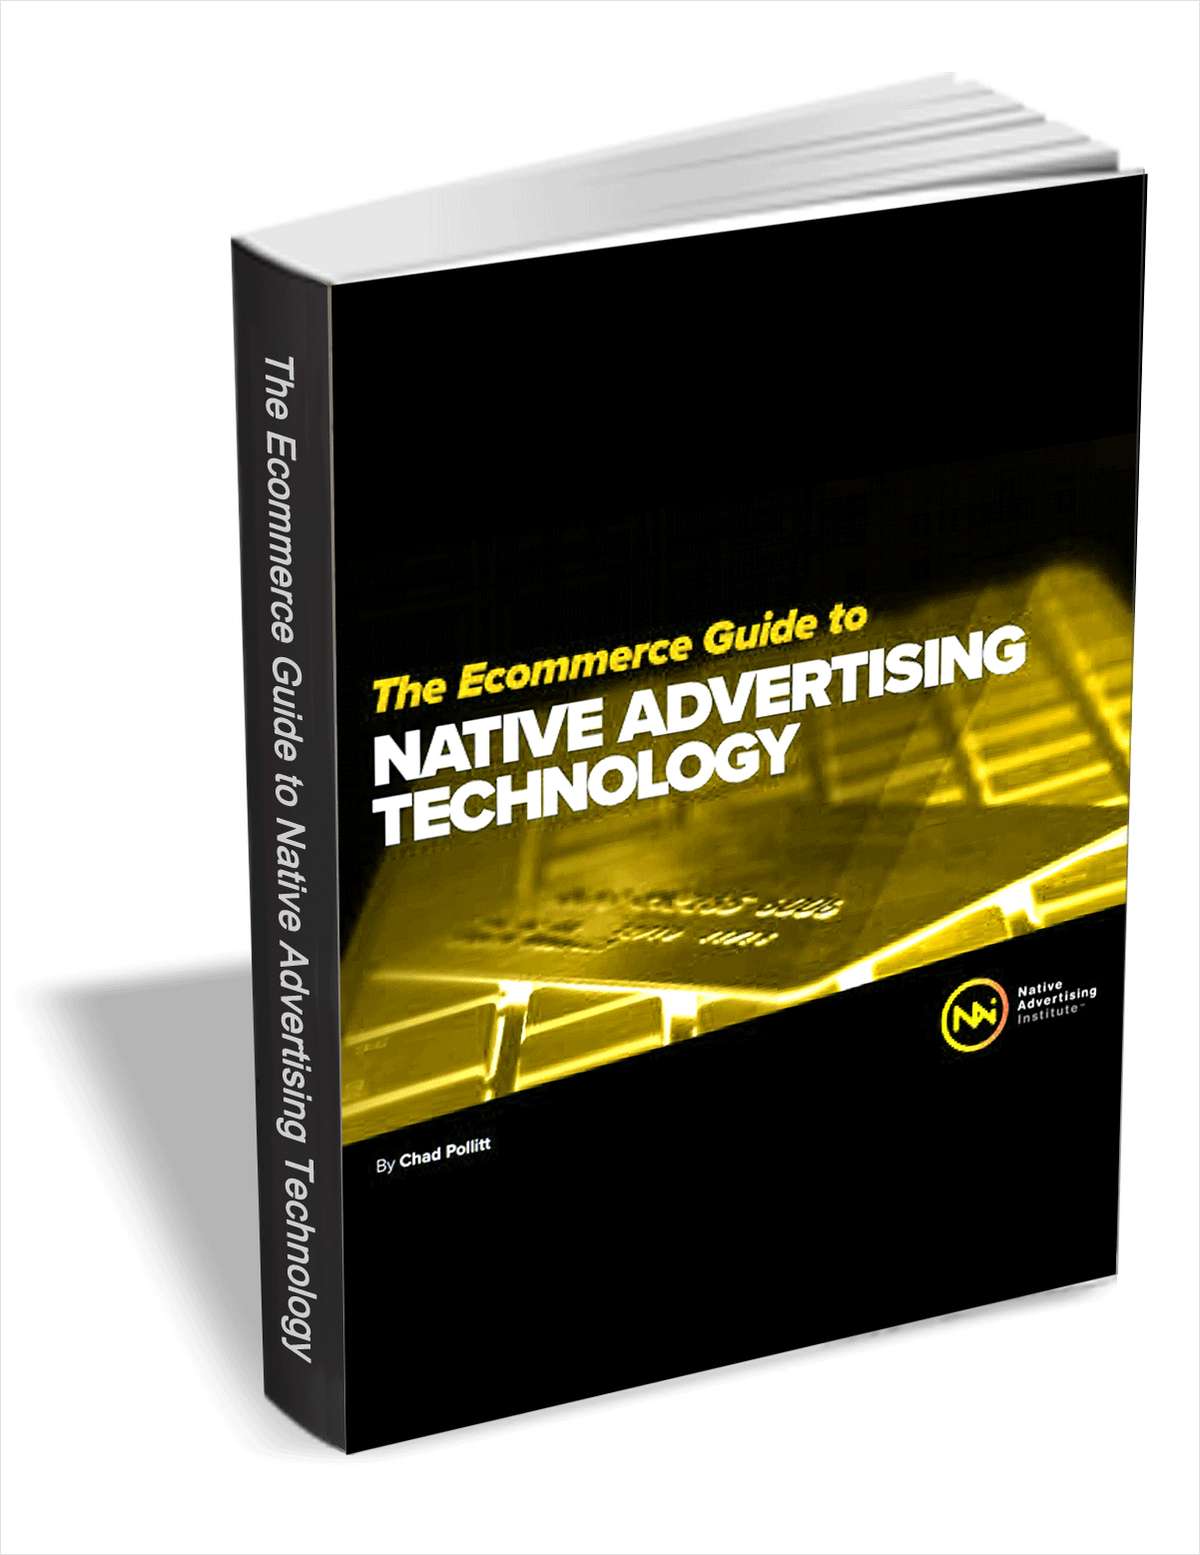 The Ecommerce Guide to Native Advertising Technology - Discover the Native Advertising Possibilities in Ecommerce